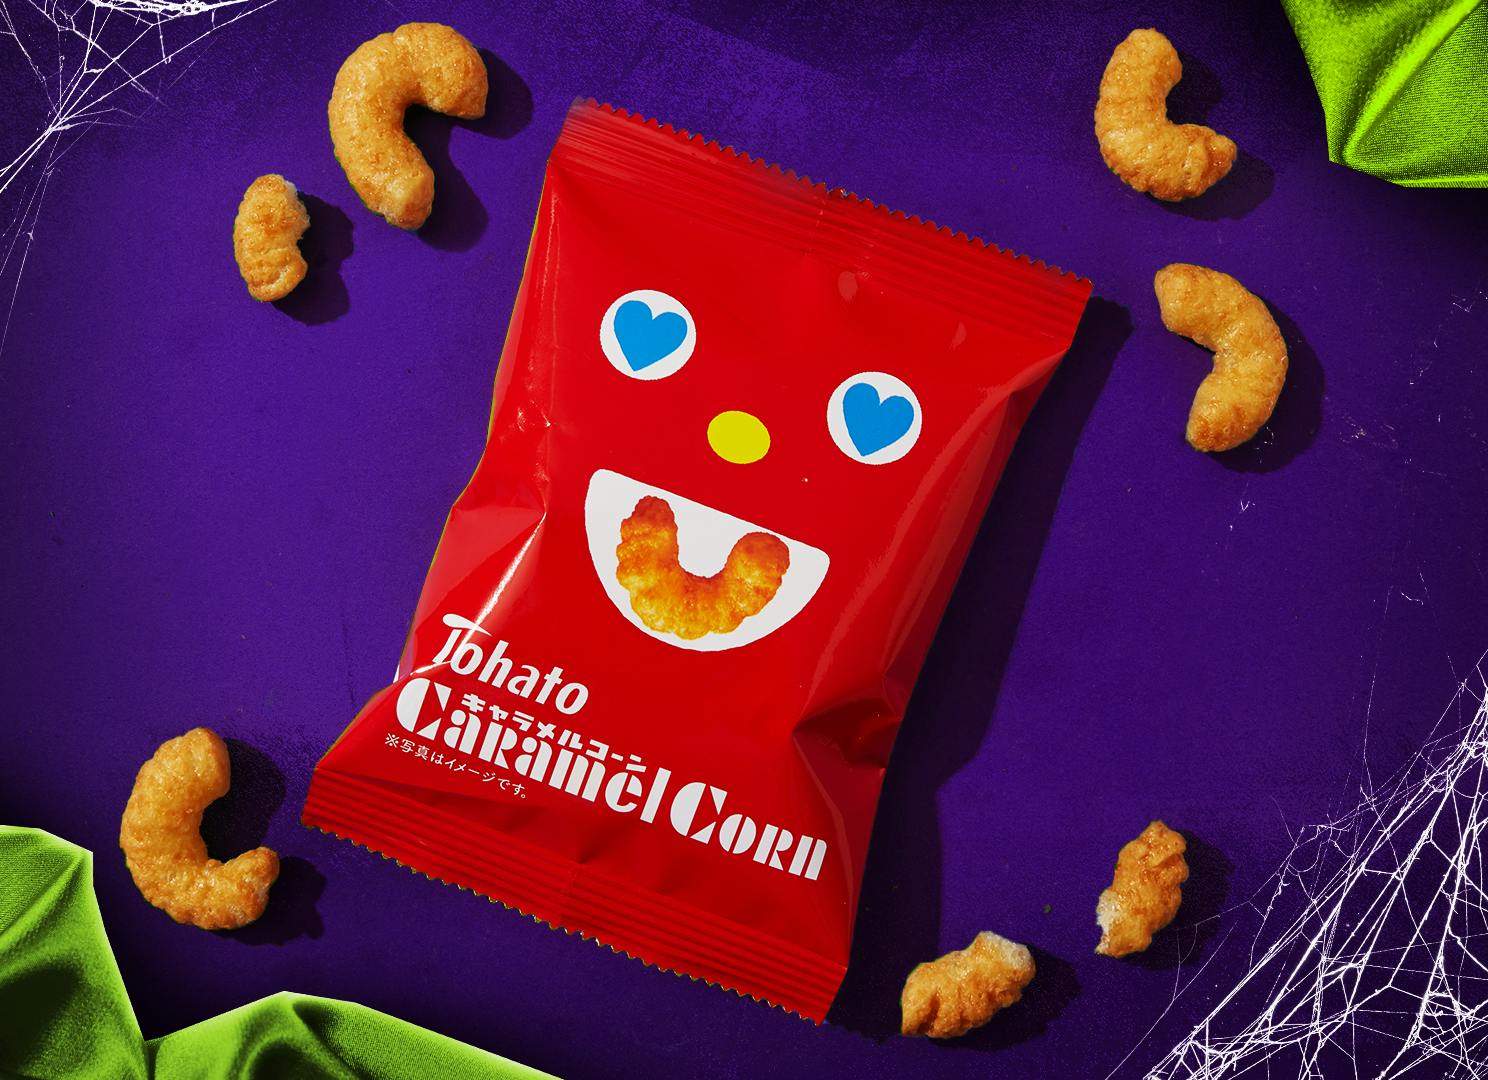 The bright red bag of Tohato Caramel Corn Puffs sits against a purple backdrop, with green fabric and spider webs at the corners.